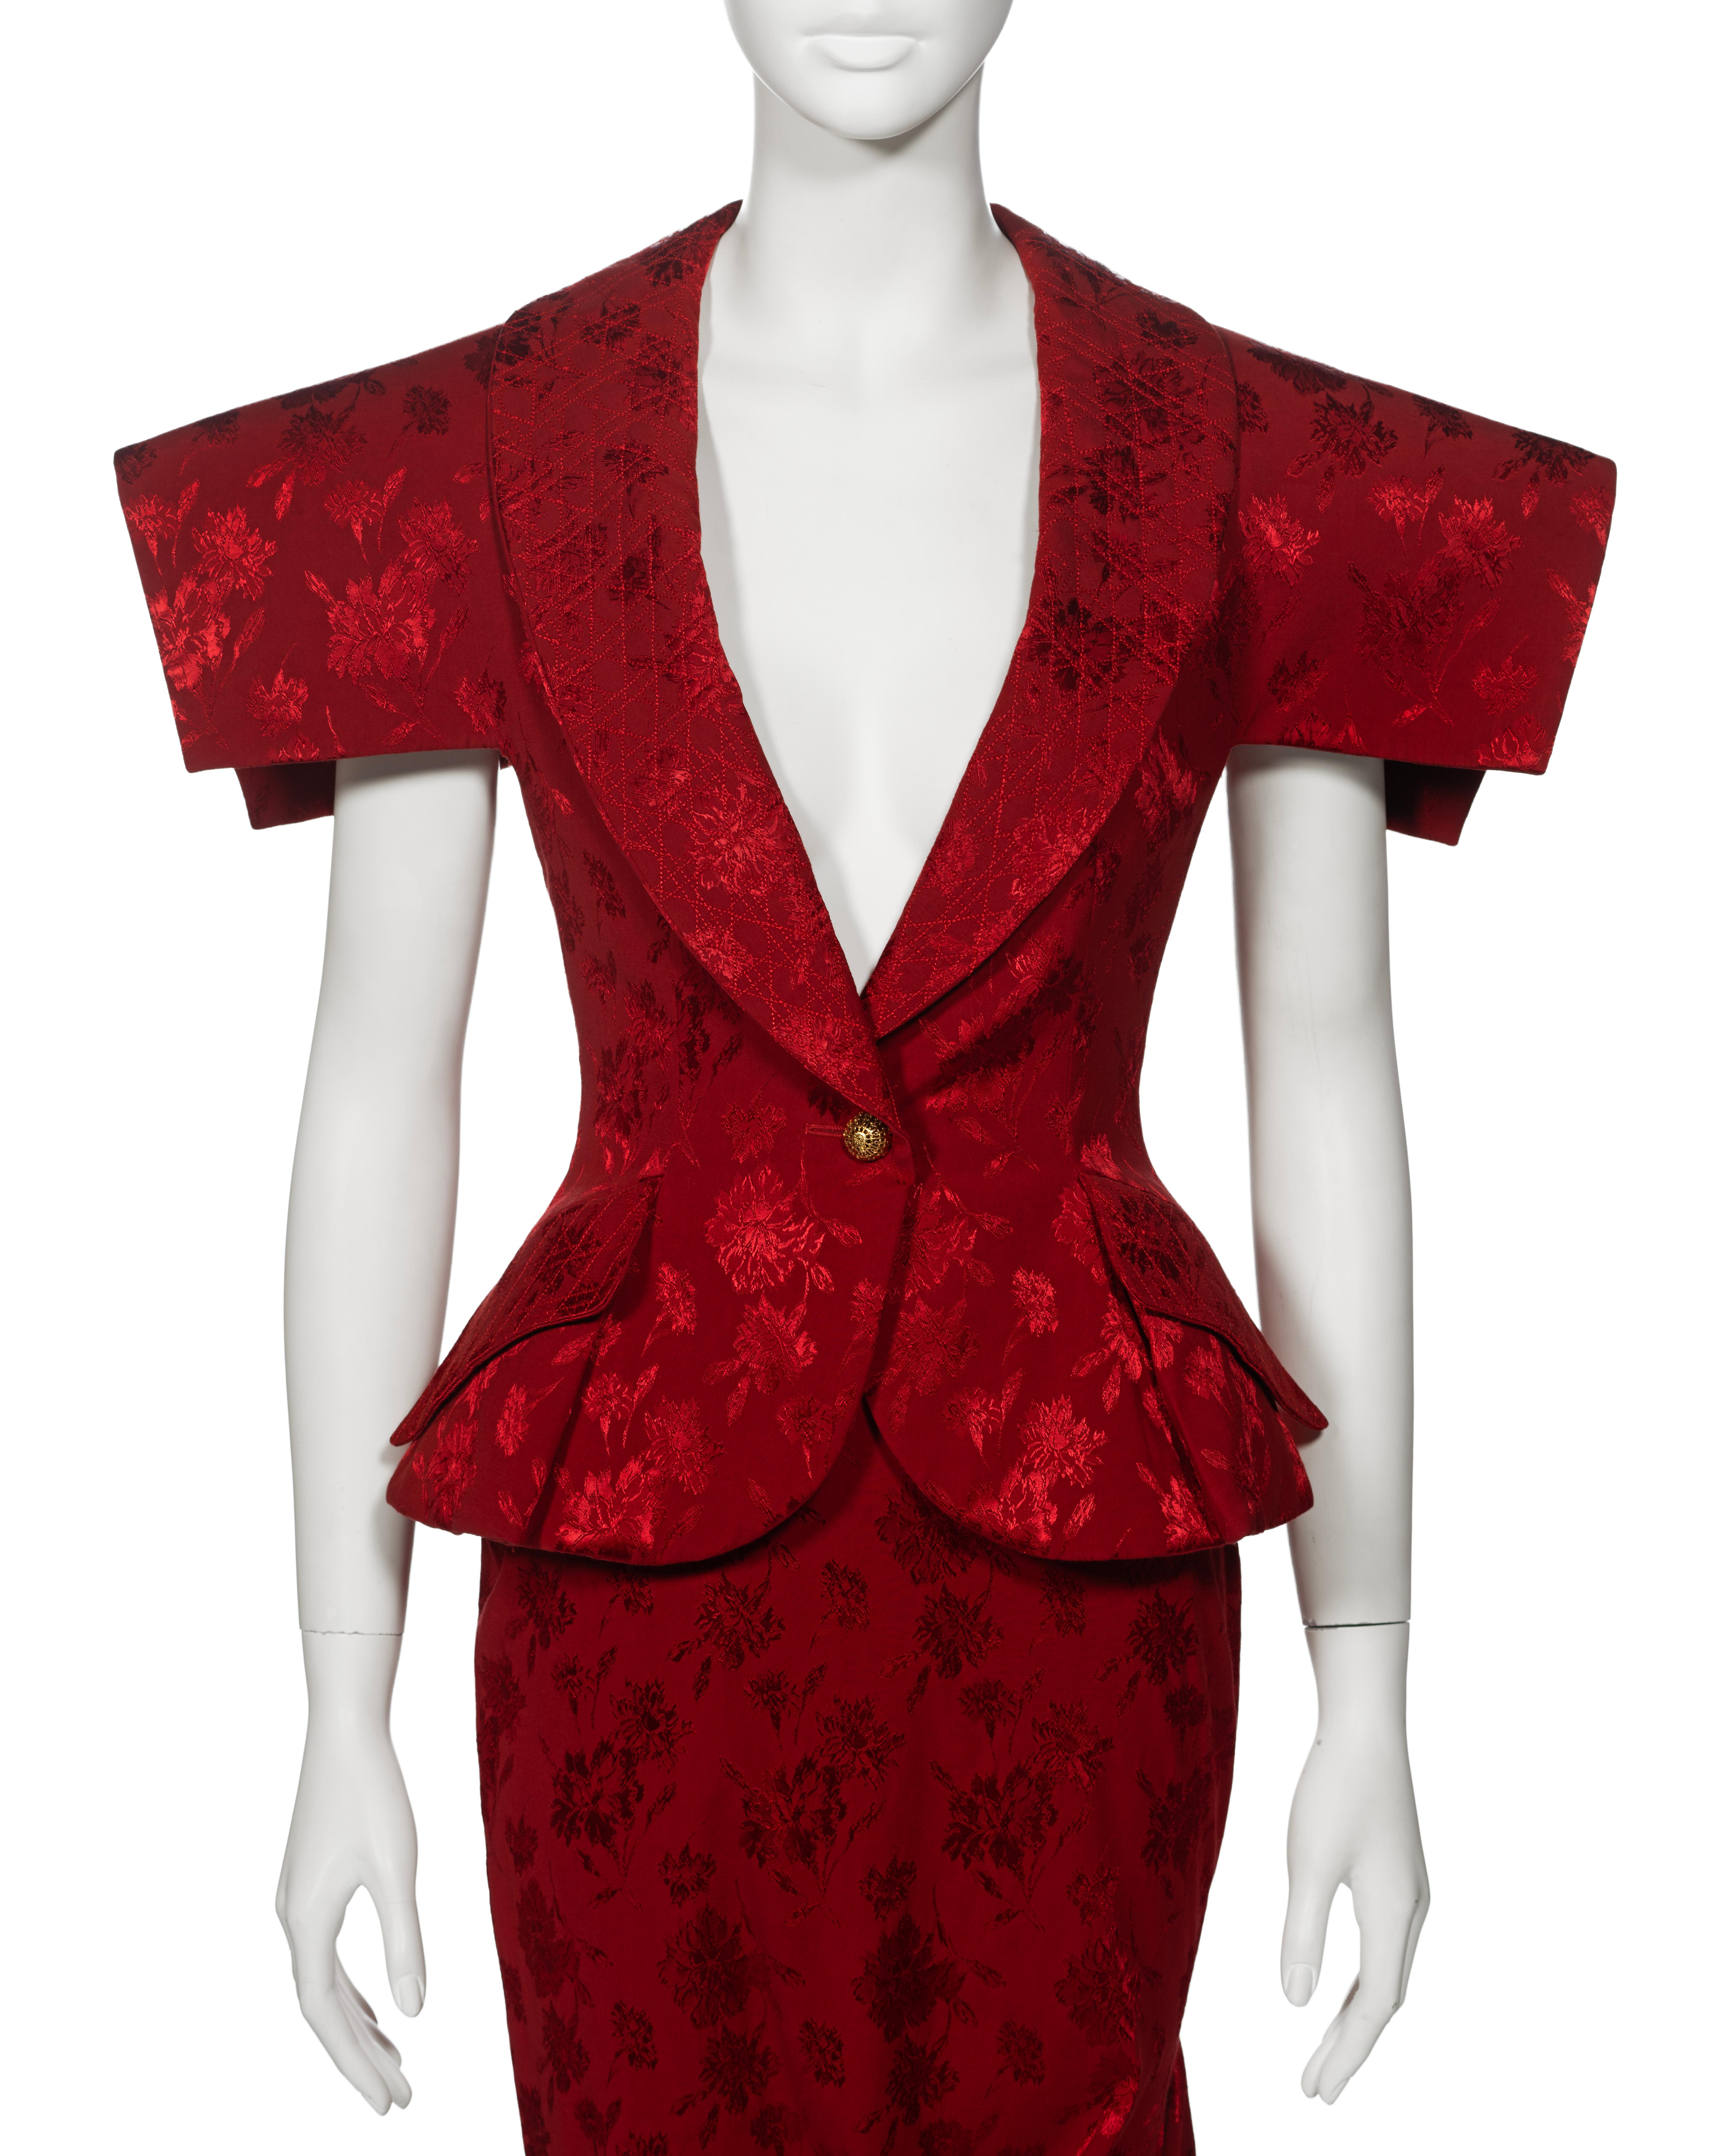 Women's Christian Dior by John Galliano Red Floral Damask Evening Ensemble, fw 1997